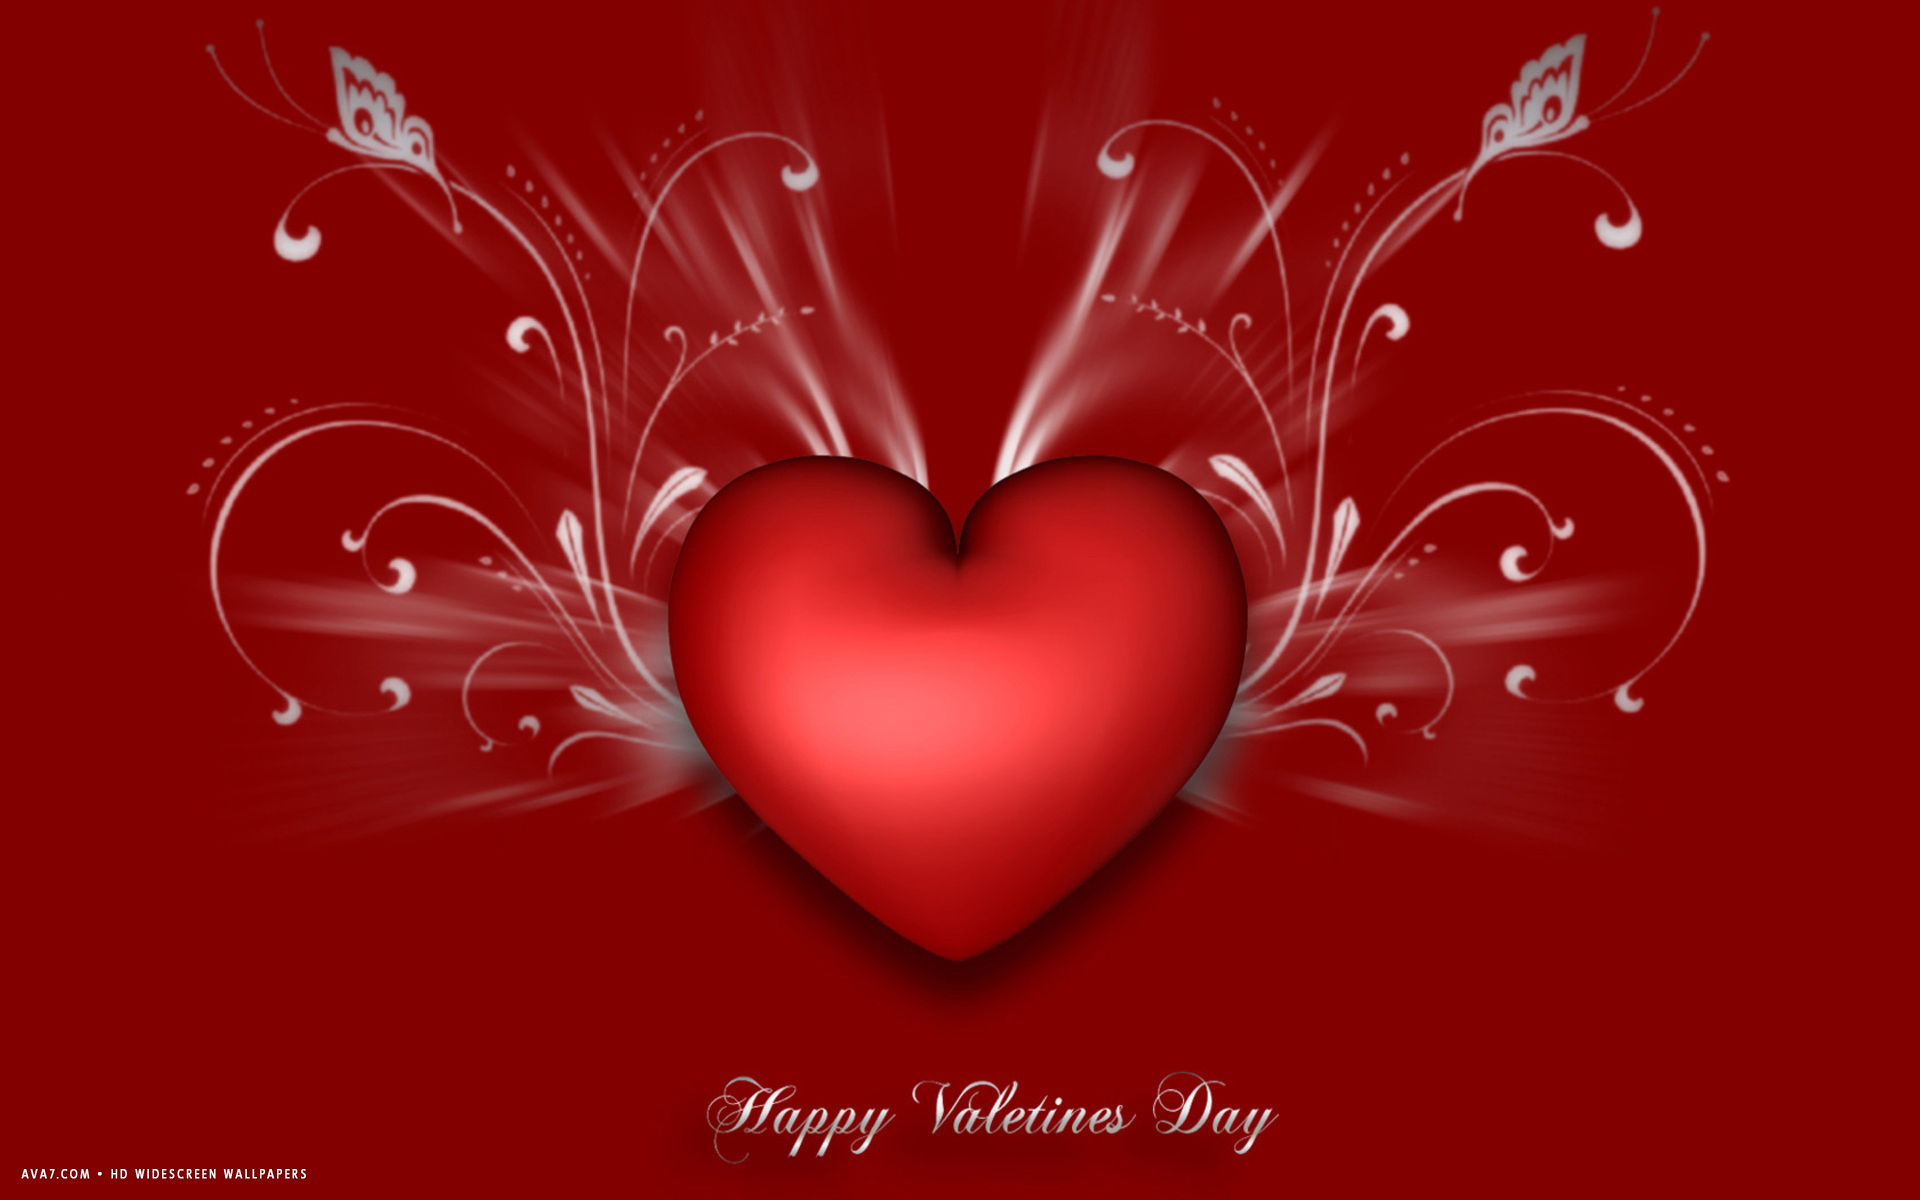 valentines day happy red abstract love big heart HD widescreen wallpaper / romantic background